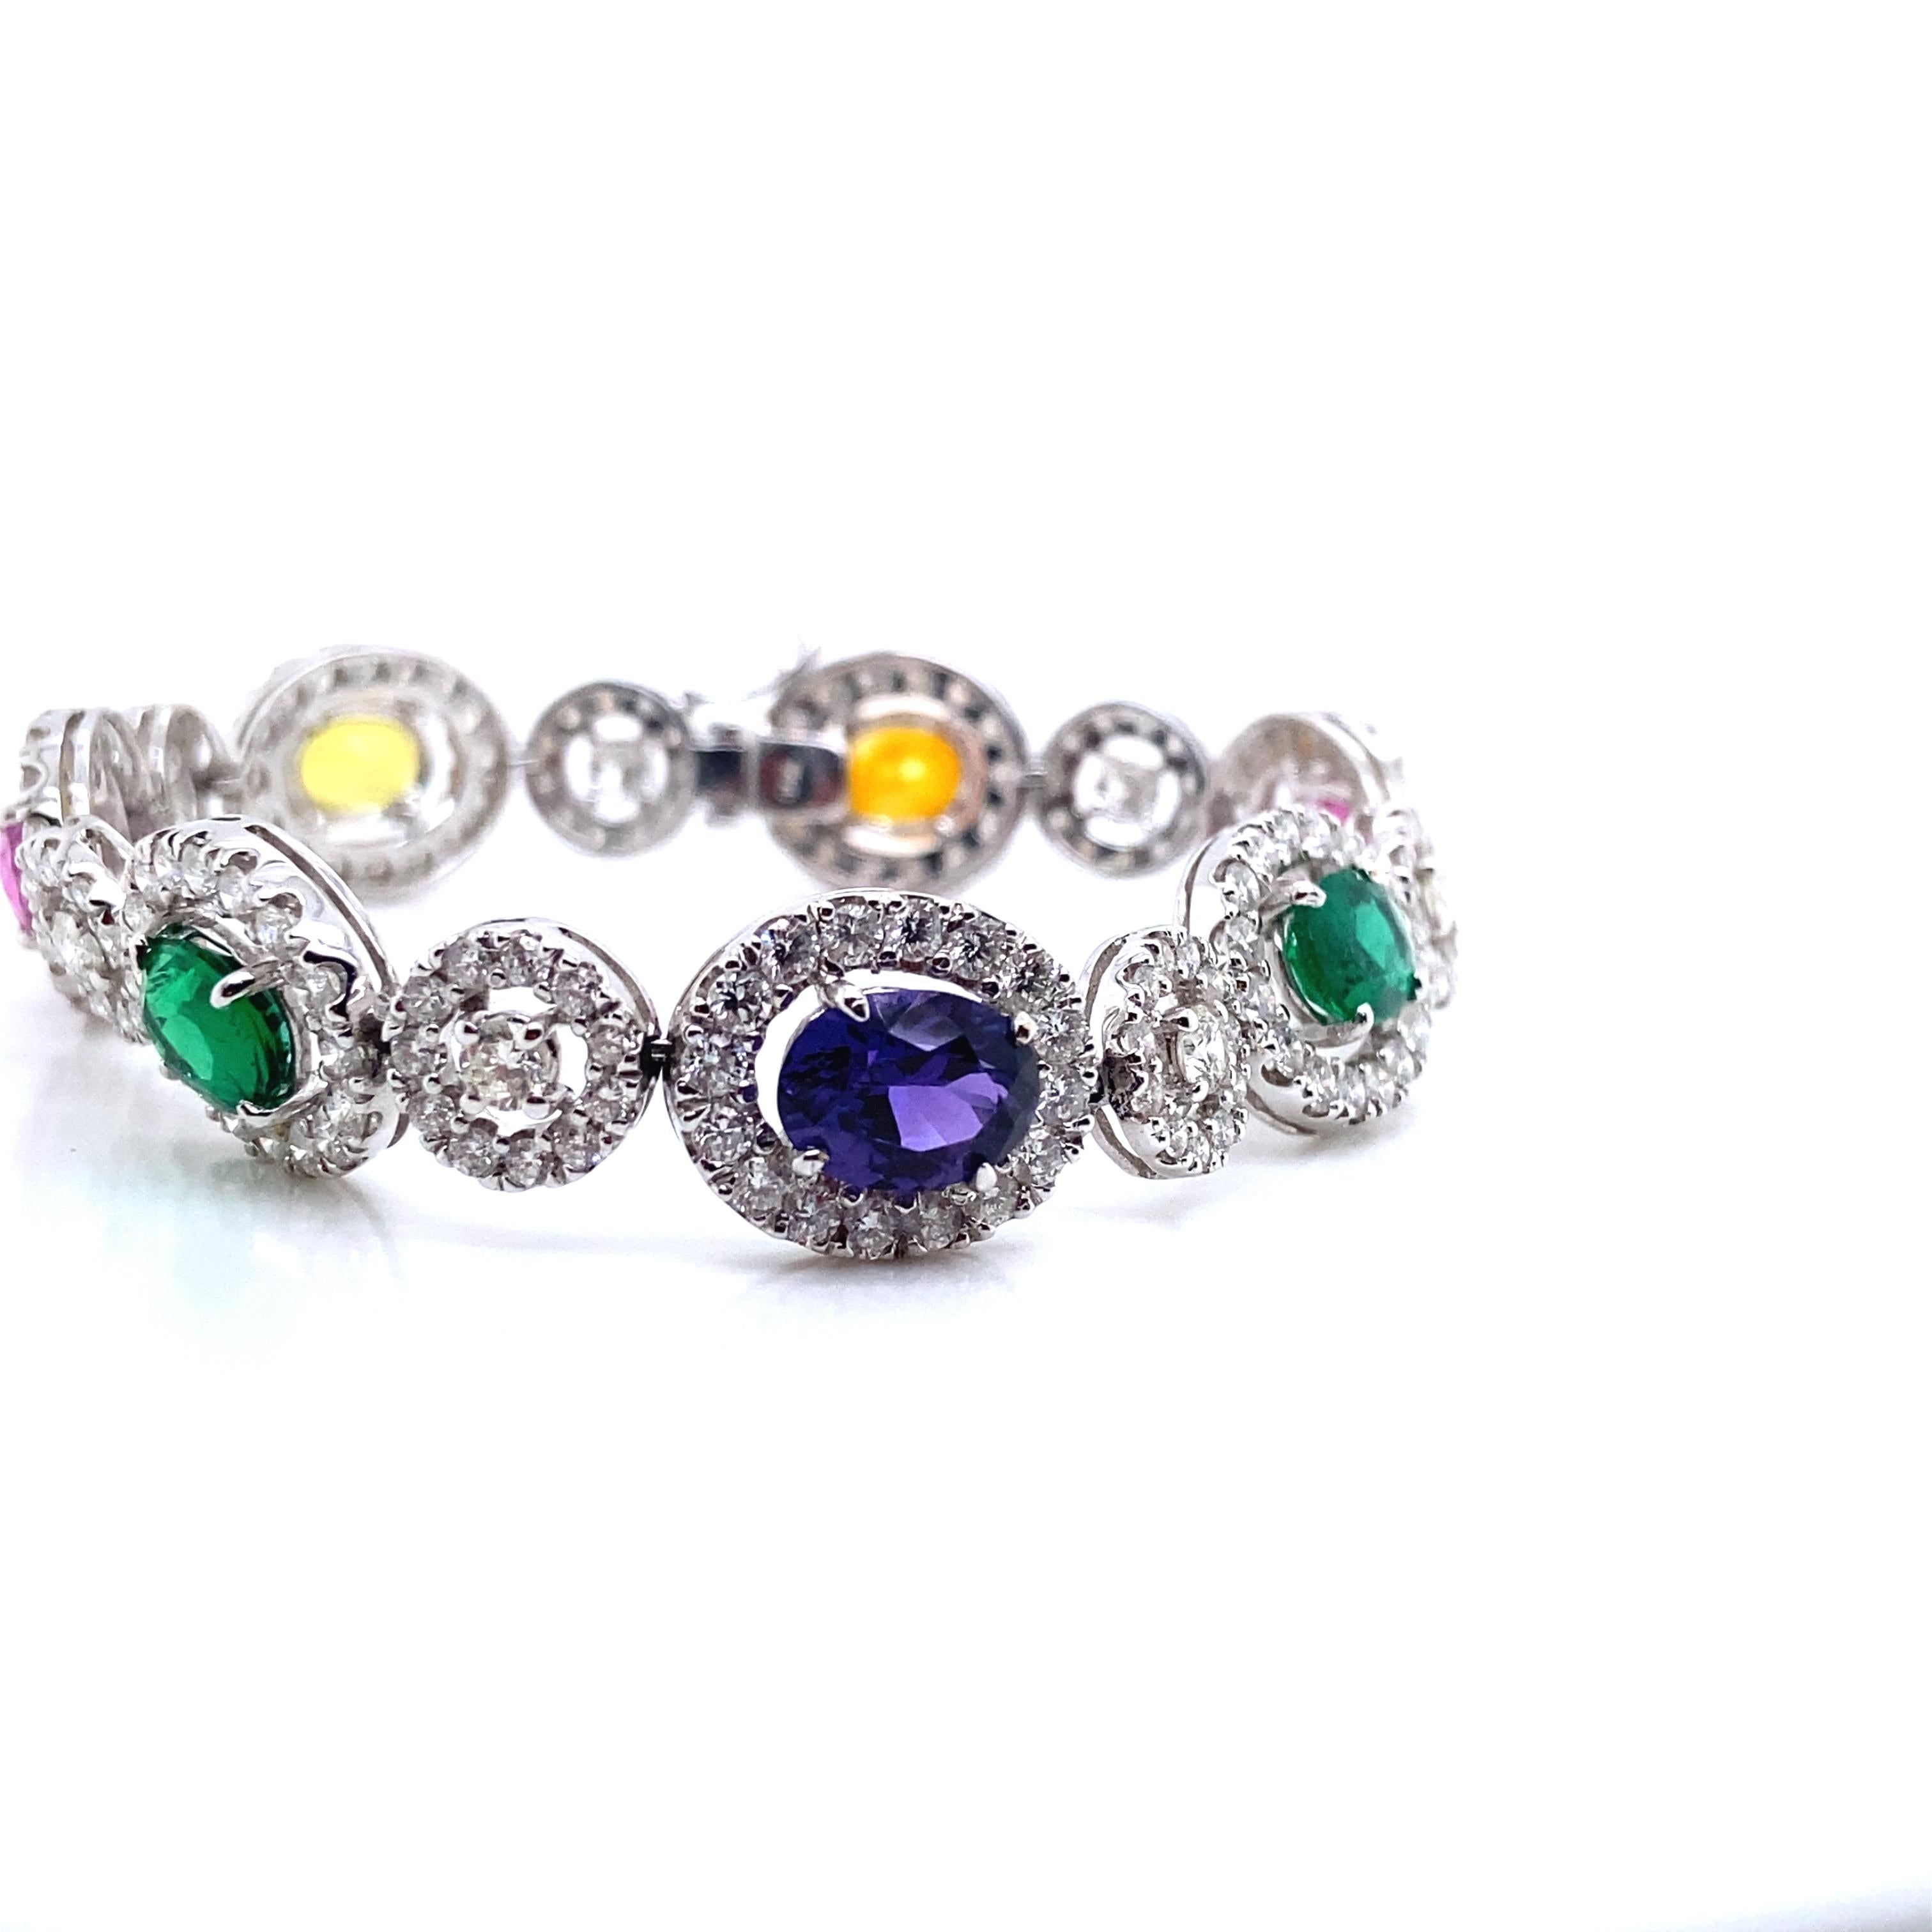 Mixed Cut 10.41 Carat GRS Certified No Heat Sapphire, Emerald, and Diamond Gold Bracelet  For Sale